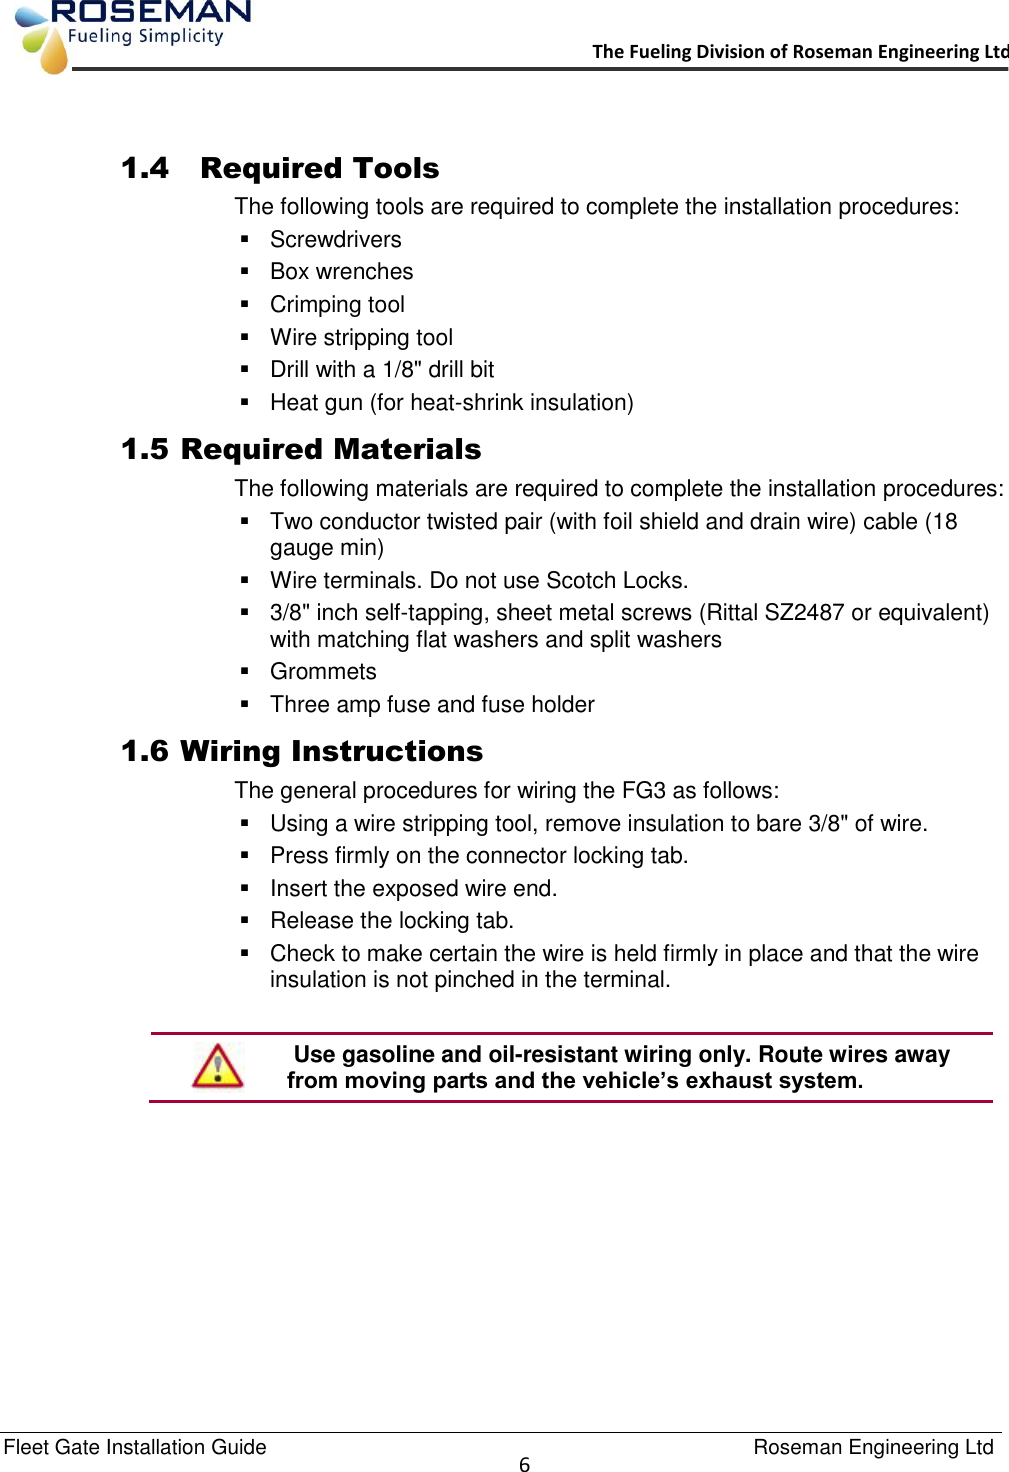   Fleet Gate Installation Guide                                                                                    Roseman Engineering Ltd  6      The Fueling Division of Roseman Engineering Ltd.                                                                  1.4   Required Tools  The following tools are required to complete the installation procedures:   Screwdrivers   Box wrenches   Crimping tool   Wire stripping tool   Drill with a 1/8&quot; drill bit   Heat gun (for heat-shrink insulation) 1.5 Required Materials The following materials are required to complete the installation procedures:   Two conductor twisted pair (with foil shield and drain wire) cable (18 gauge min)   Wire terminals. Do not use Scotch Locks.   3/8&quot; inch self-tapping, sheet metal screws (Rittal SZ2487 or equivalent) with matching flat washers and split washers   Grommets   Three amp fuse and fuse holder 1.6 Wiring Instructions  The general procedures for wiring the FG3 as follows:   Using a wire stripping tool, remove insulation to bare 3/8&quot; of wire.   Press firmly on the connector locking tab.   Insert the exposed wire end.   Release the locking tab.   Check to make certain the wire is held firmly in place and that the wire insulation is not pinched in the terminal.     Use gasoline and oil-resistant wiring only. Route wires away from moving parts and the vehicle’s exhaust system.    